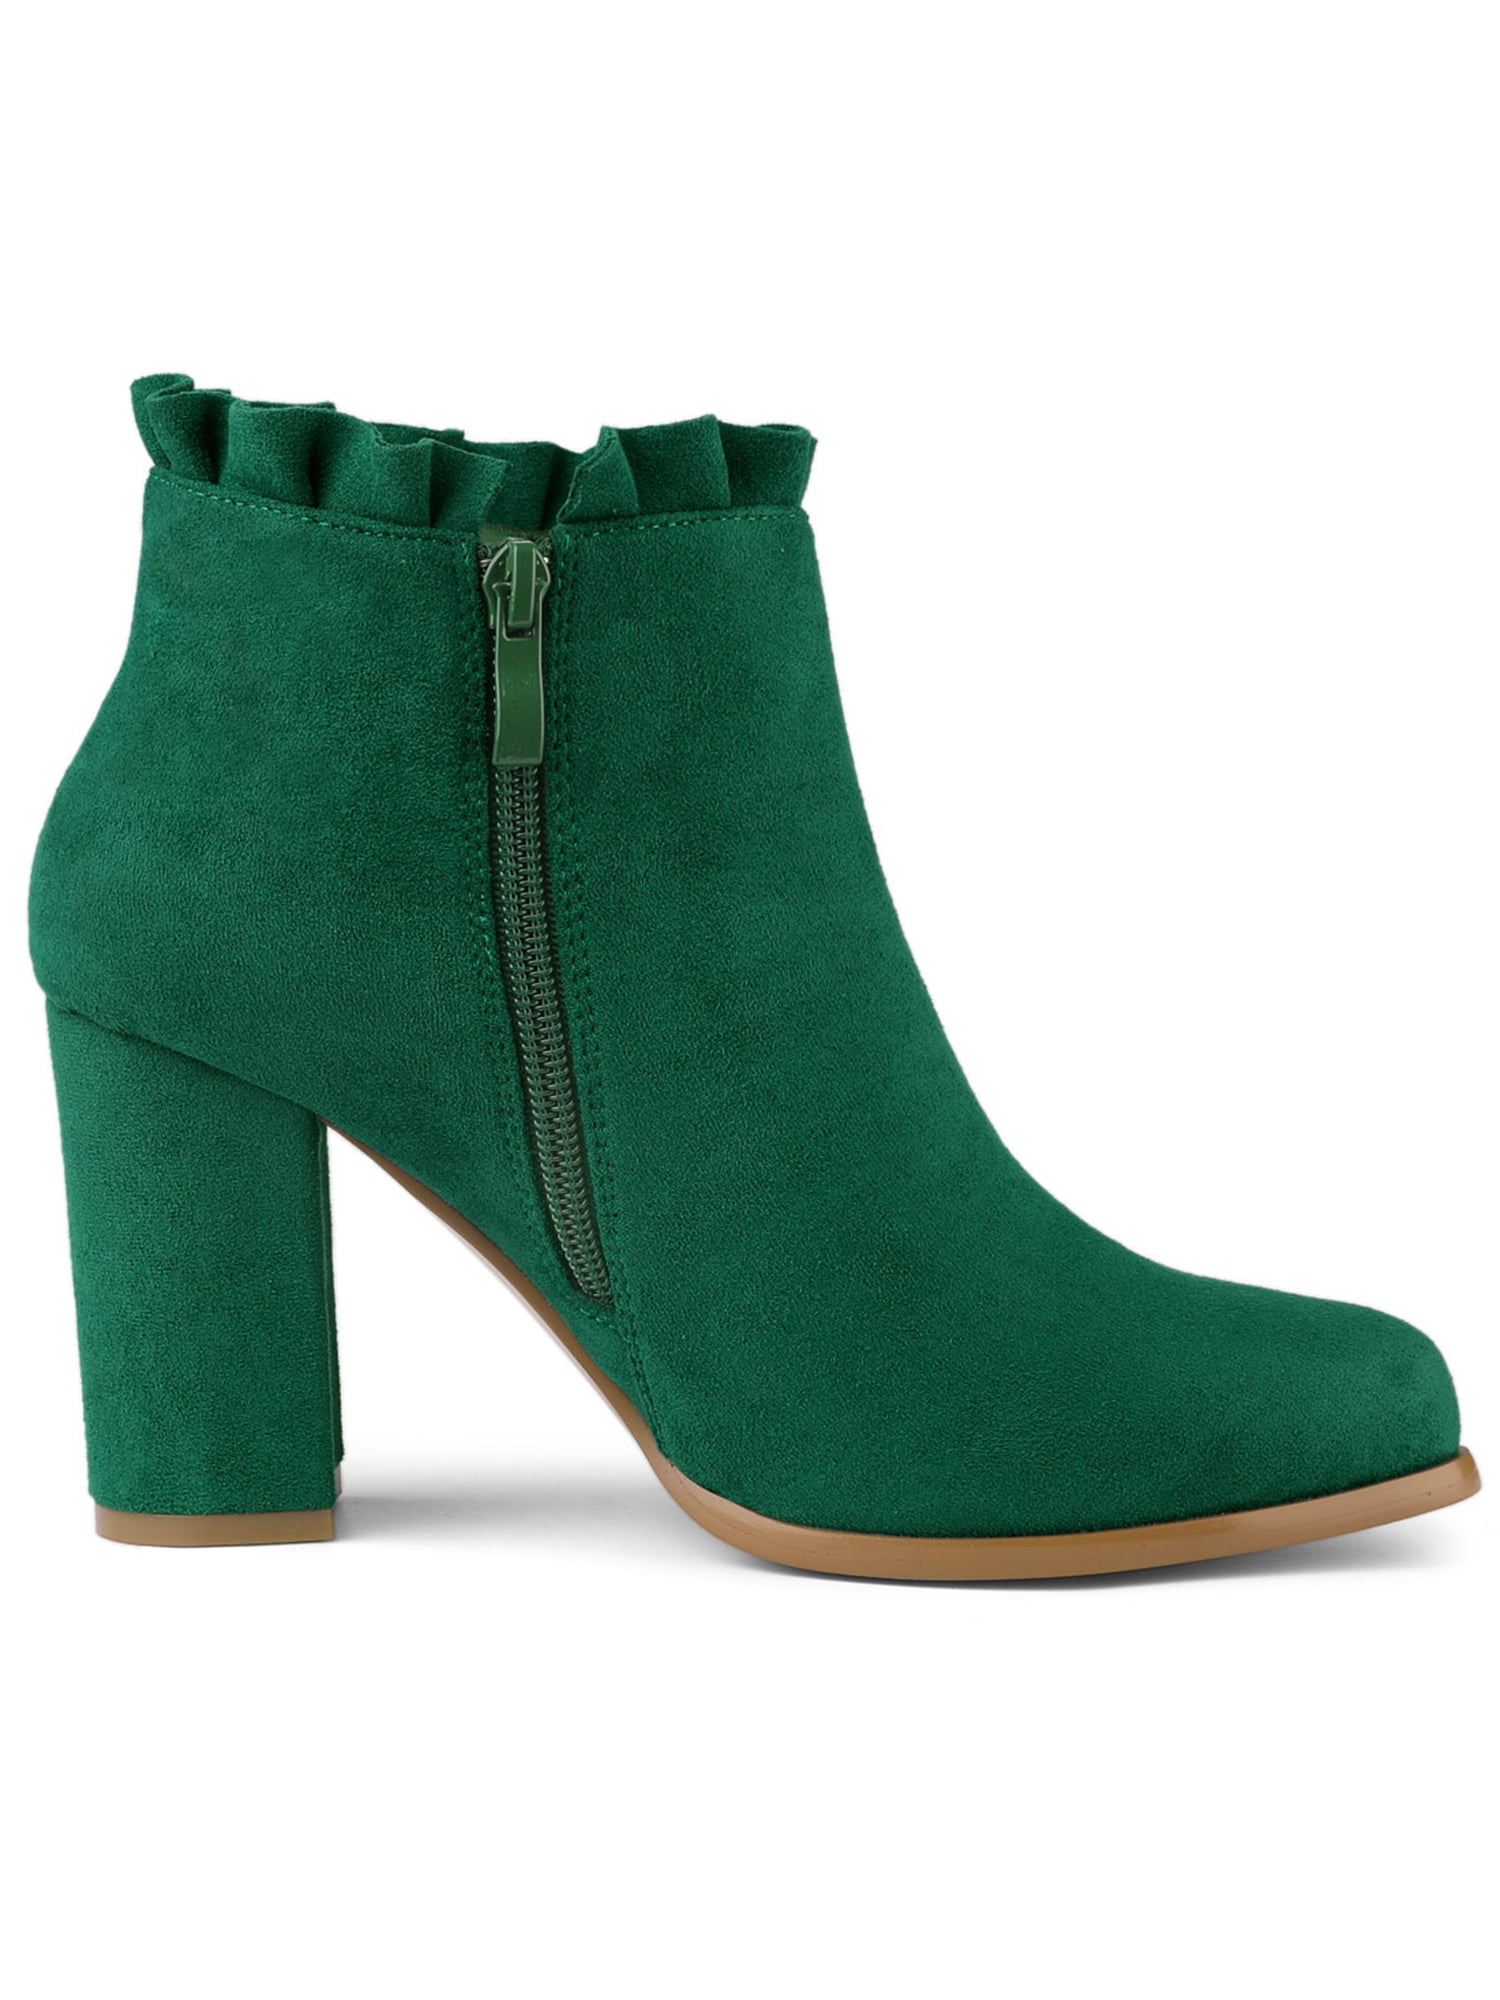 Dark Green Olive Leatherette High Ankle Length Tough Casual Long Boots,  Leather Ankle Boot, High Heel Ankle Boot, ऊंची एड़ी वाले बूट, हाई एंकल बूट  - Shoppykart, Surat | ID: 27456801297